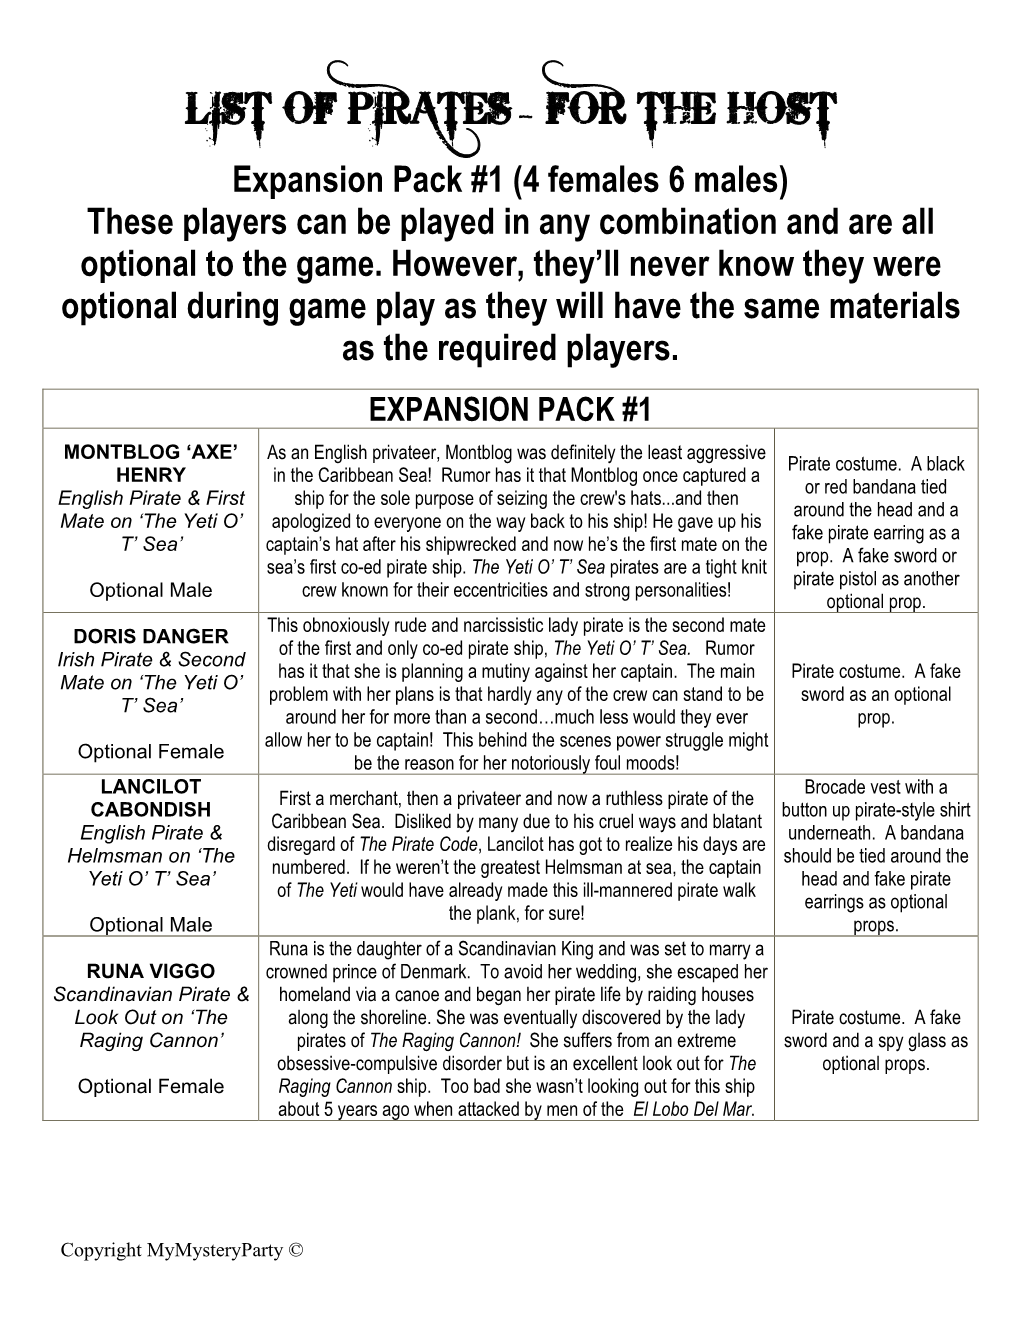 LIST of PIRATES – for the HOST Expansion Pack #1 (4 Females 6 Males) These Players Can Be Played in Any Combination and Are All Optional to the Game